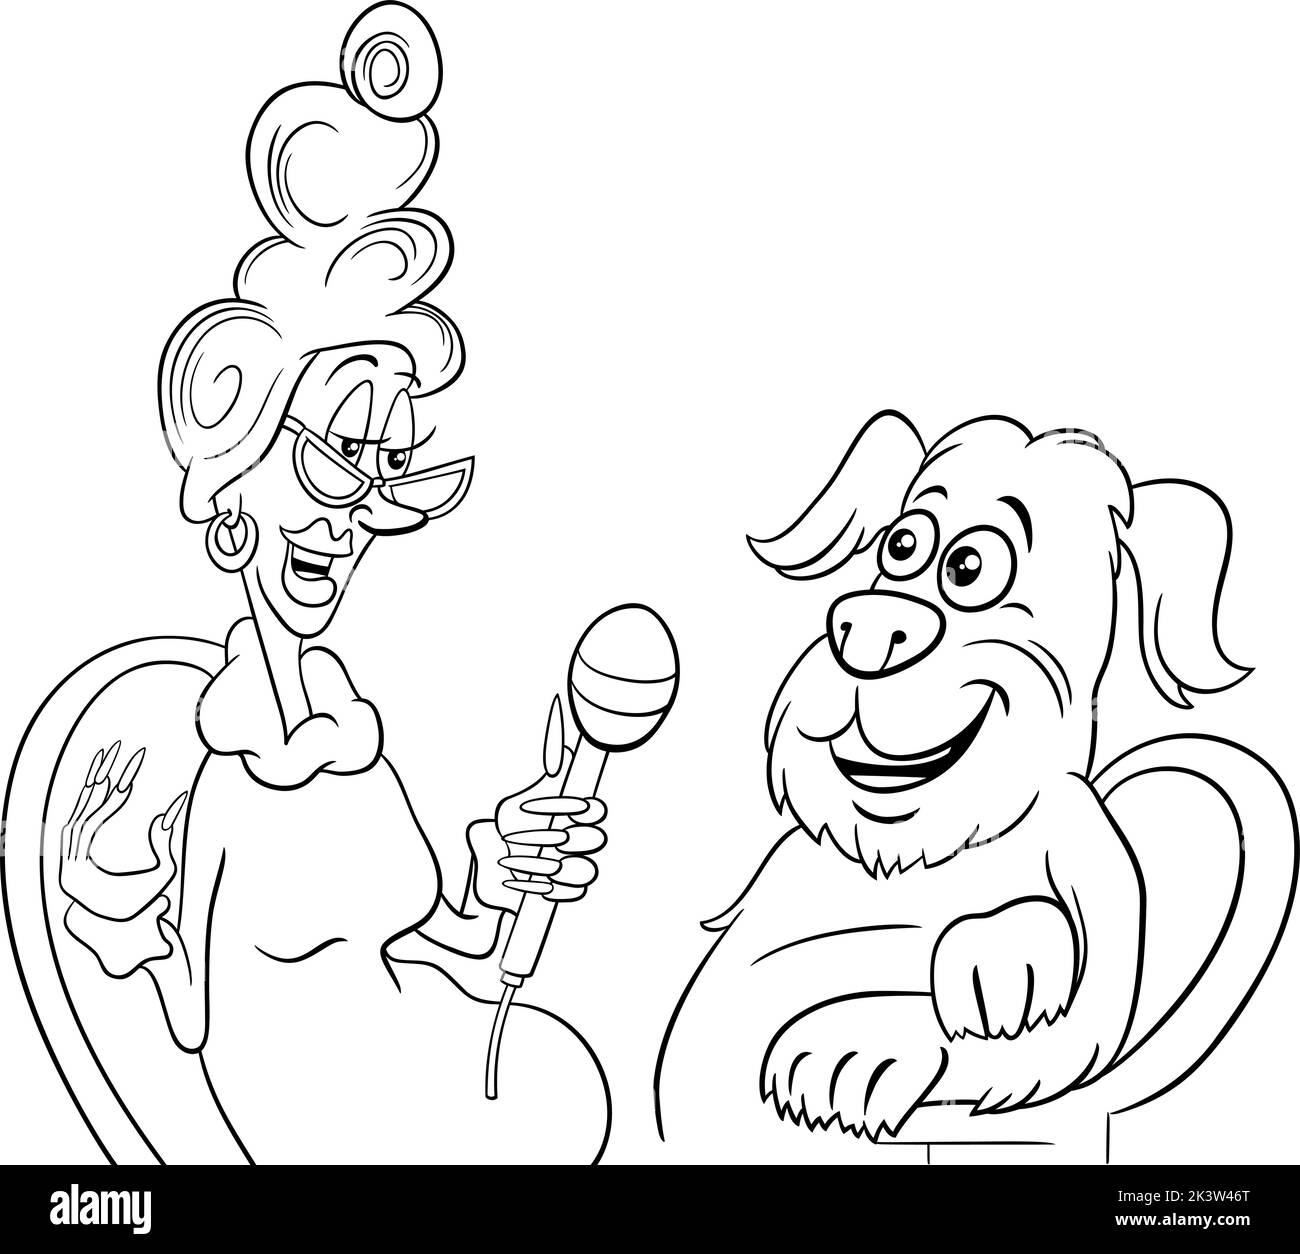 Black and white cartoon illustration of the dog giving an interview to a journalist coloring page Stock Vector